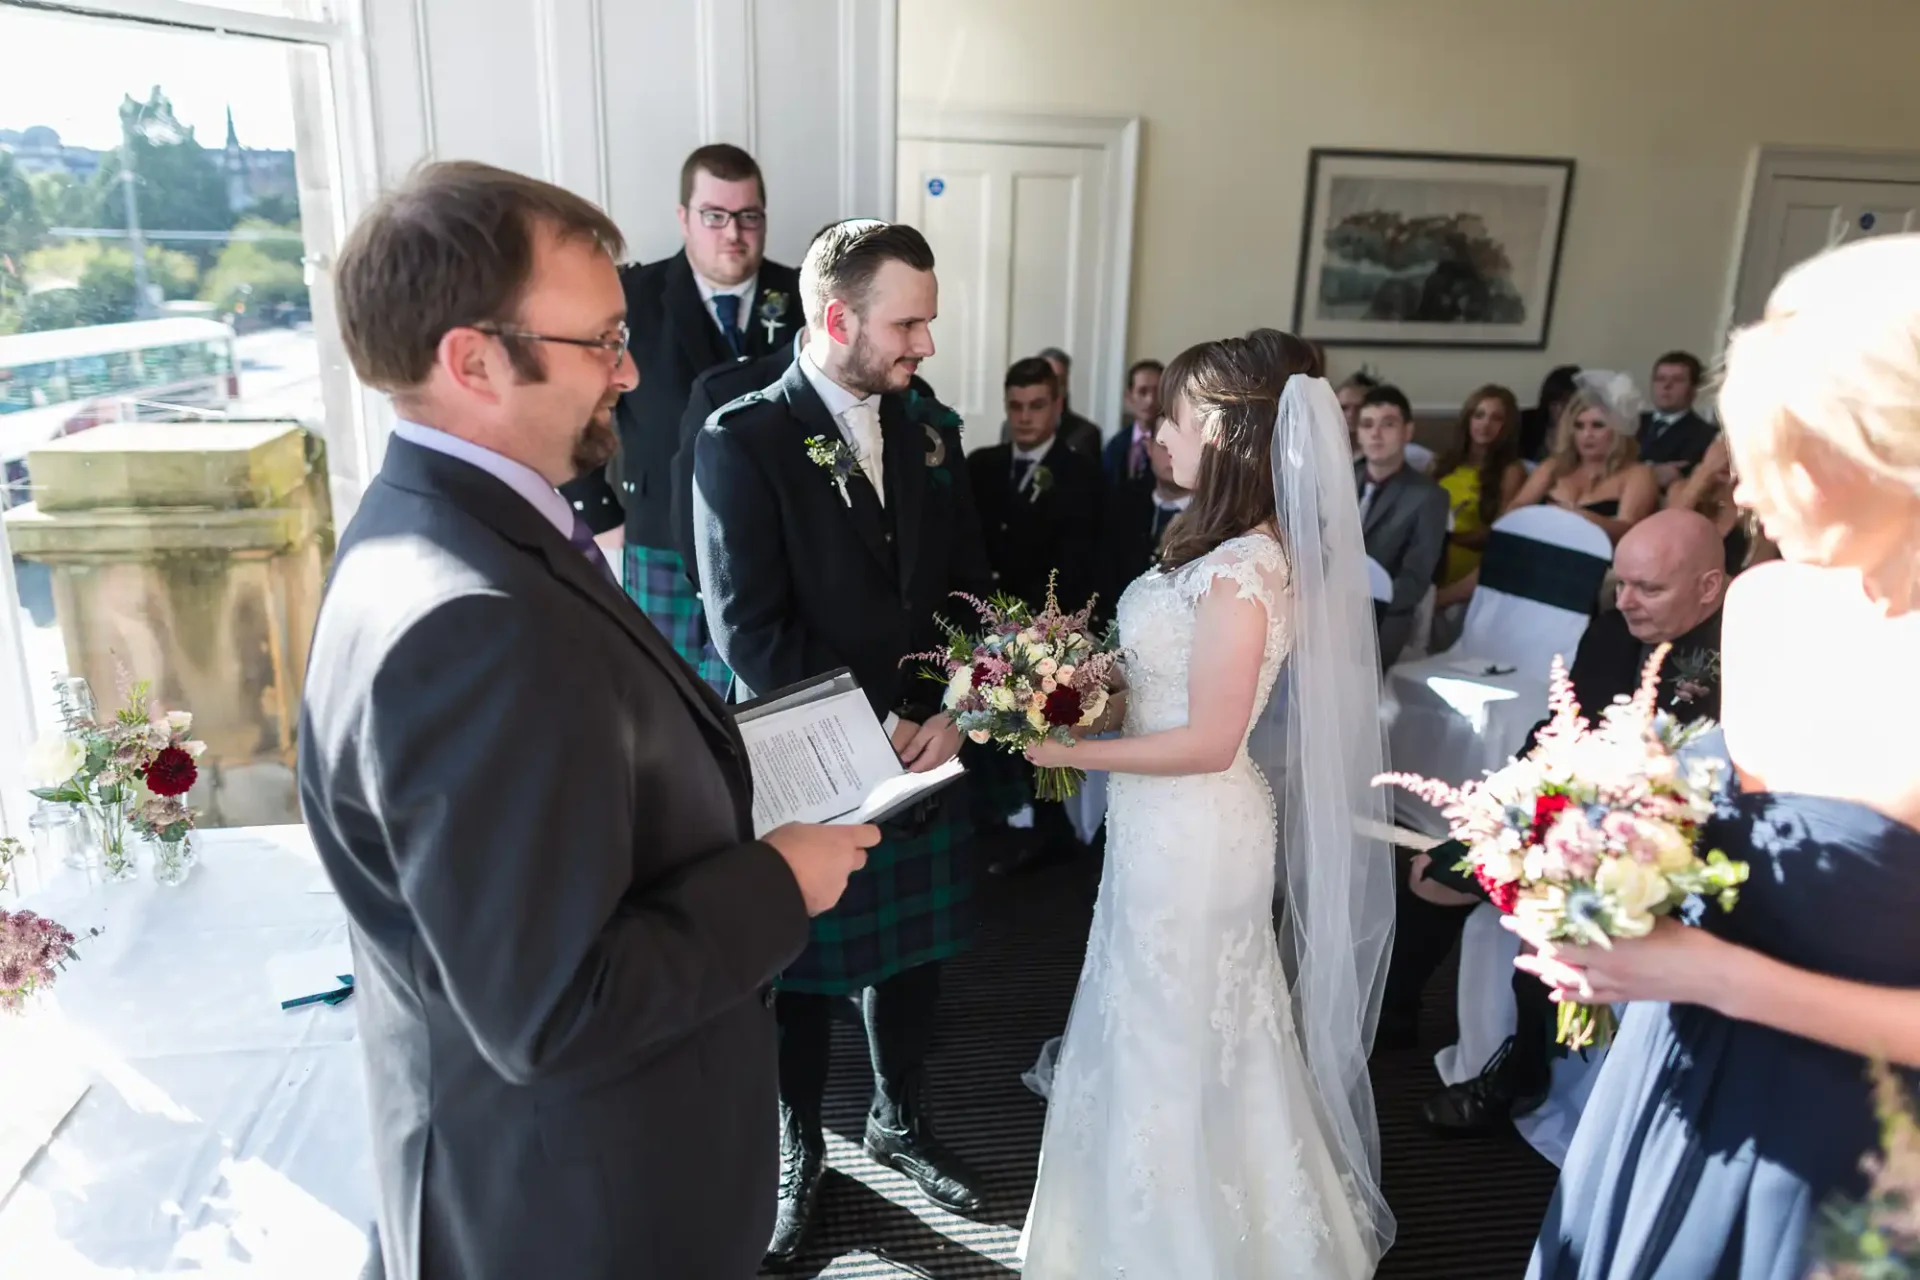 Bride and groom holding hands during a wedding ceremony in a sunlit room, with guests and an officiant surrounding them.